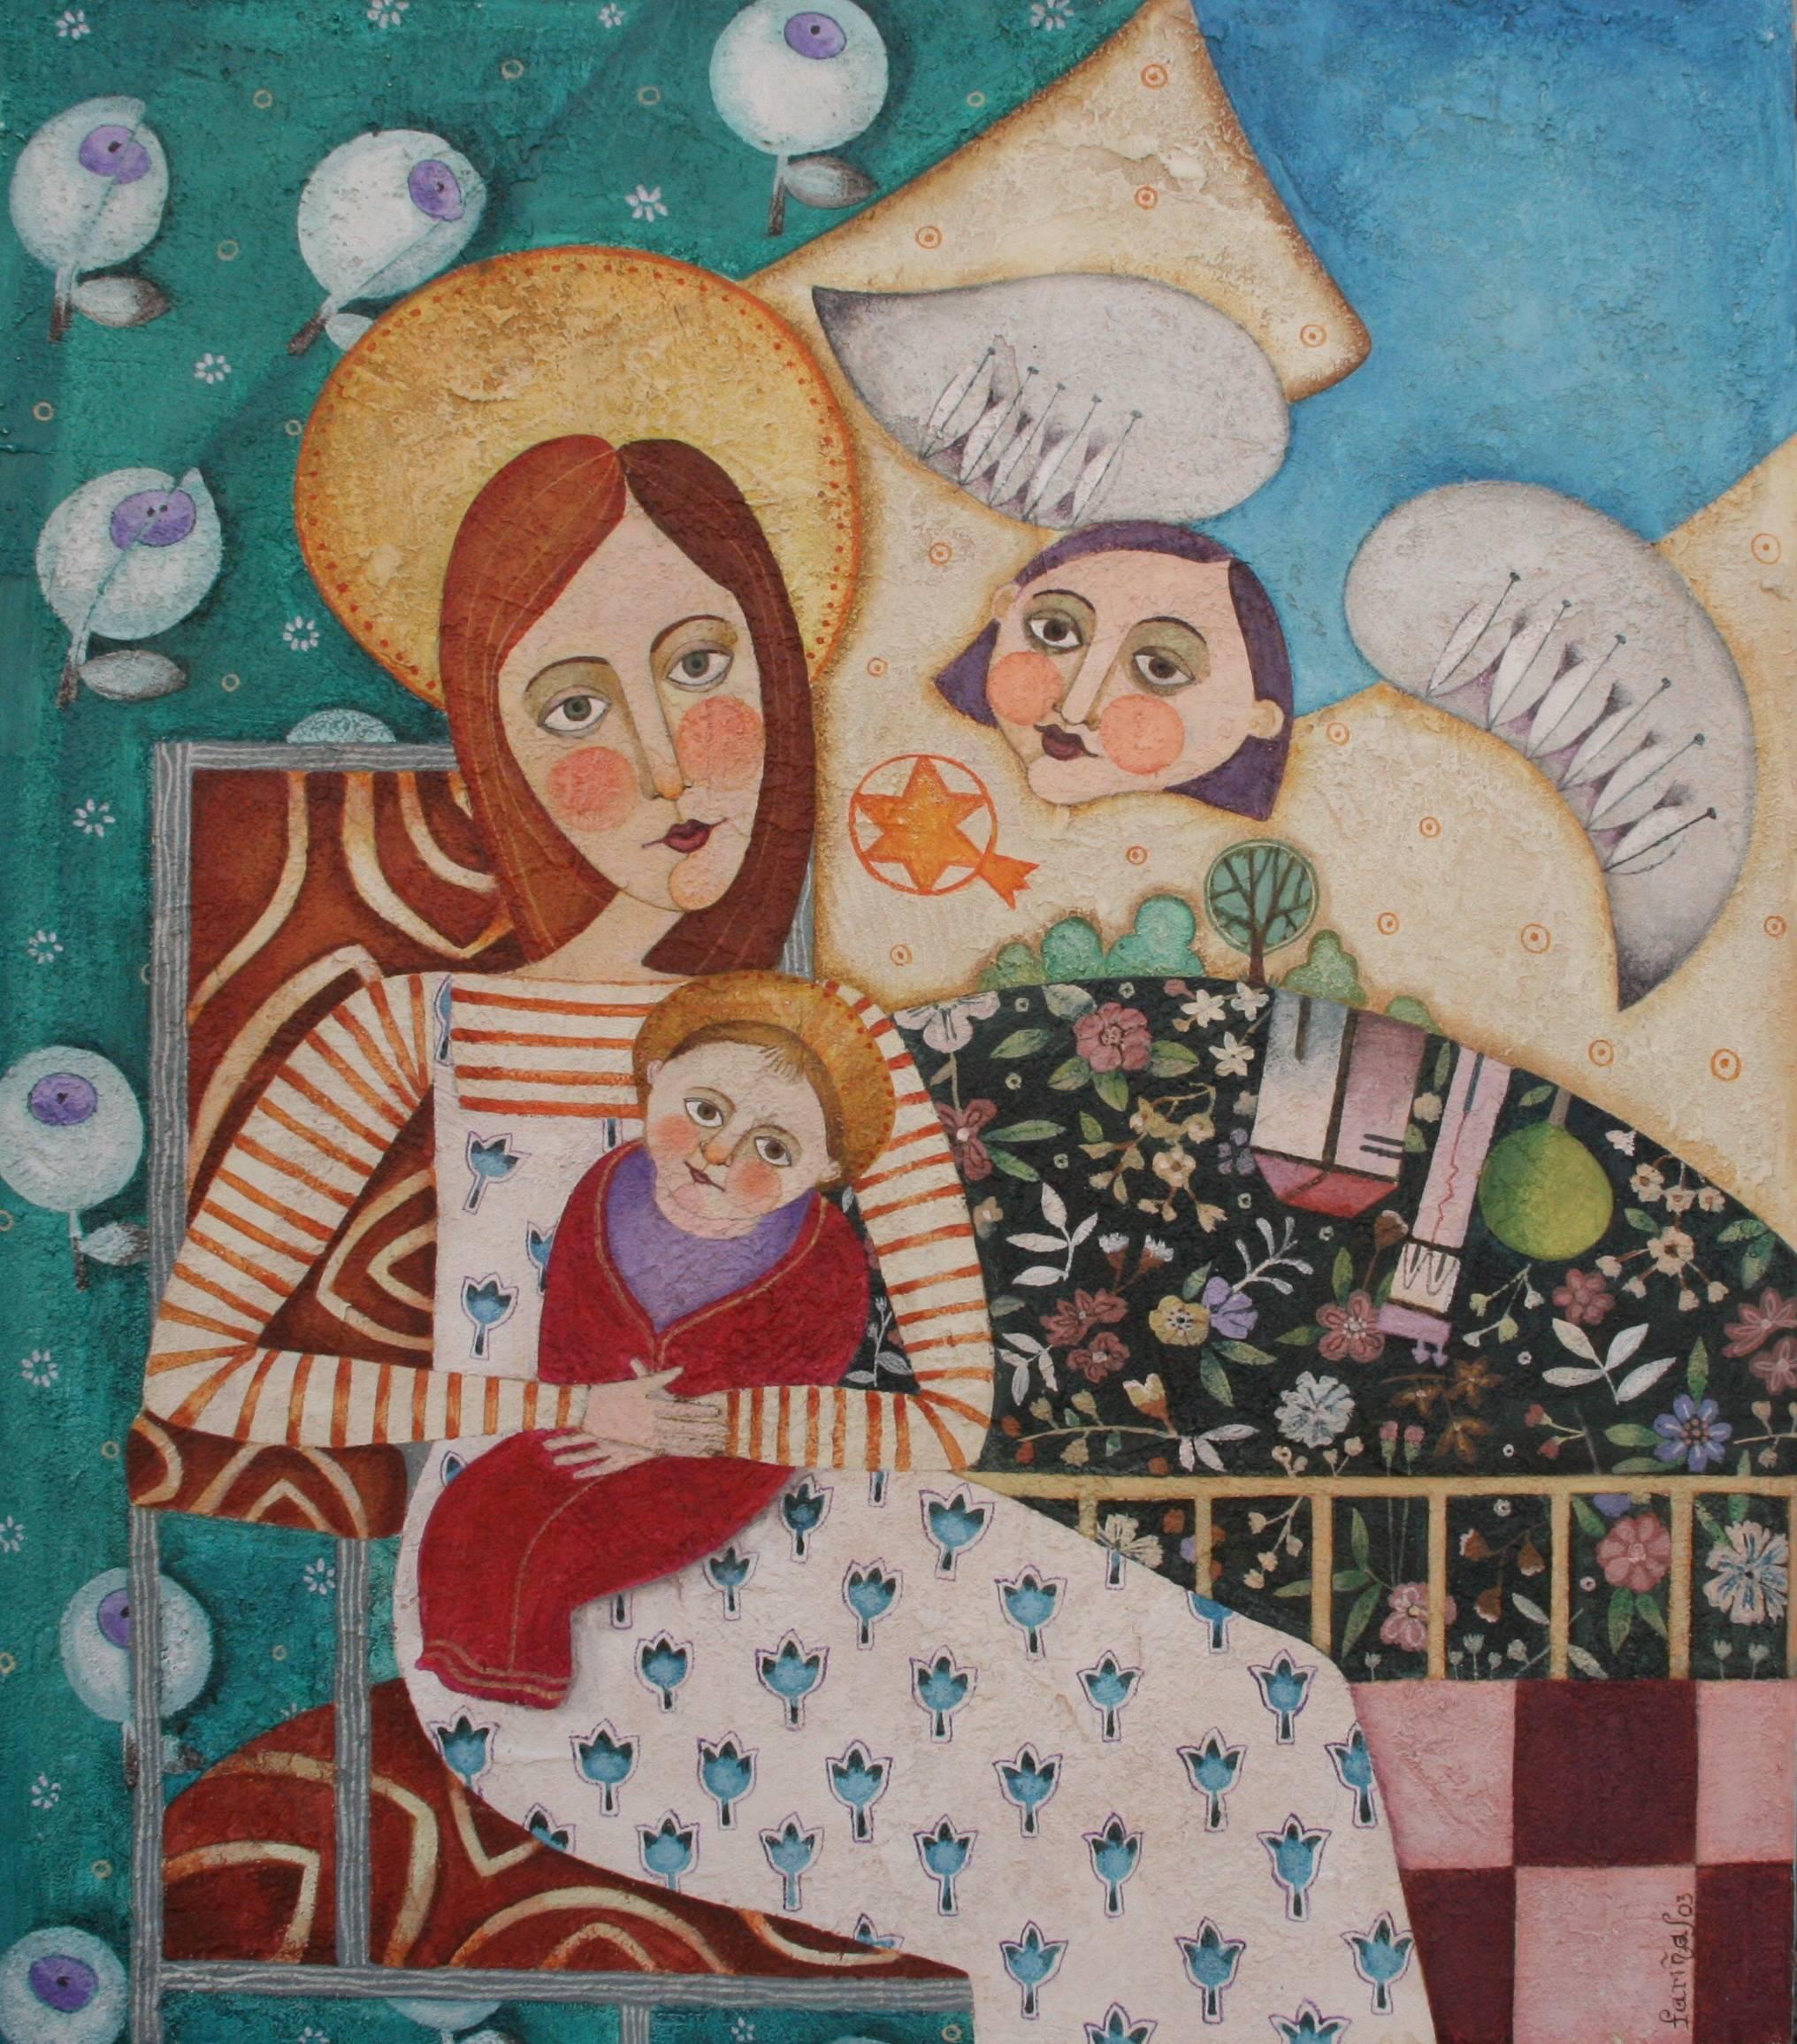 Raquel Fariñas Figurative Painting - Christmas (Navidad). Colorful image of the Madonna and child in folk style